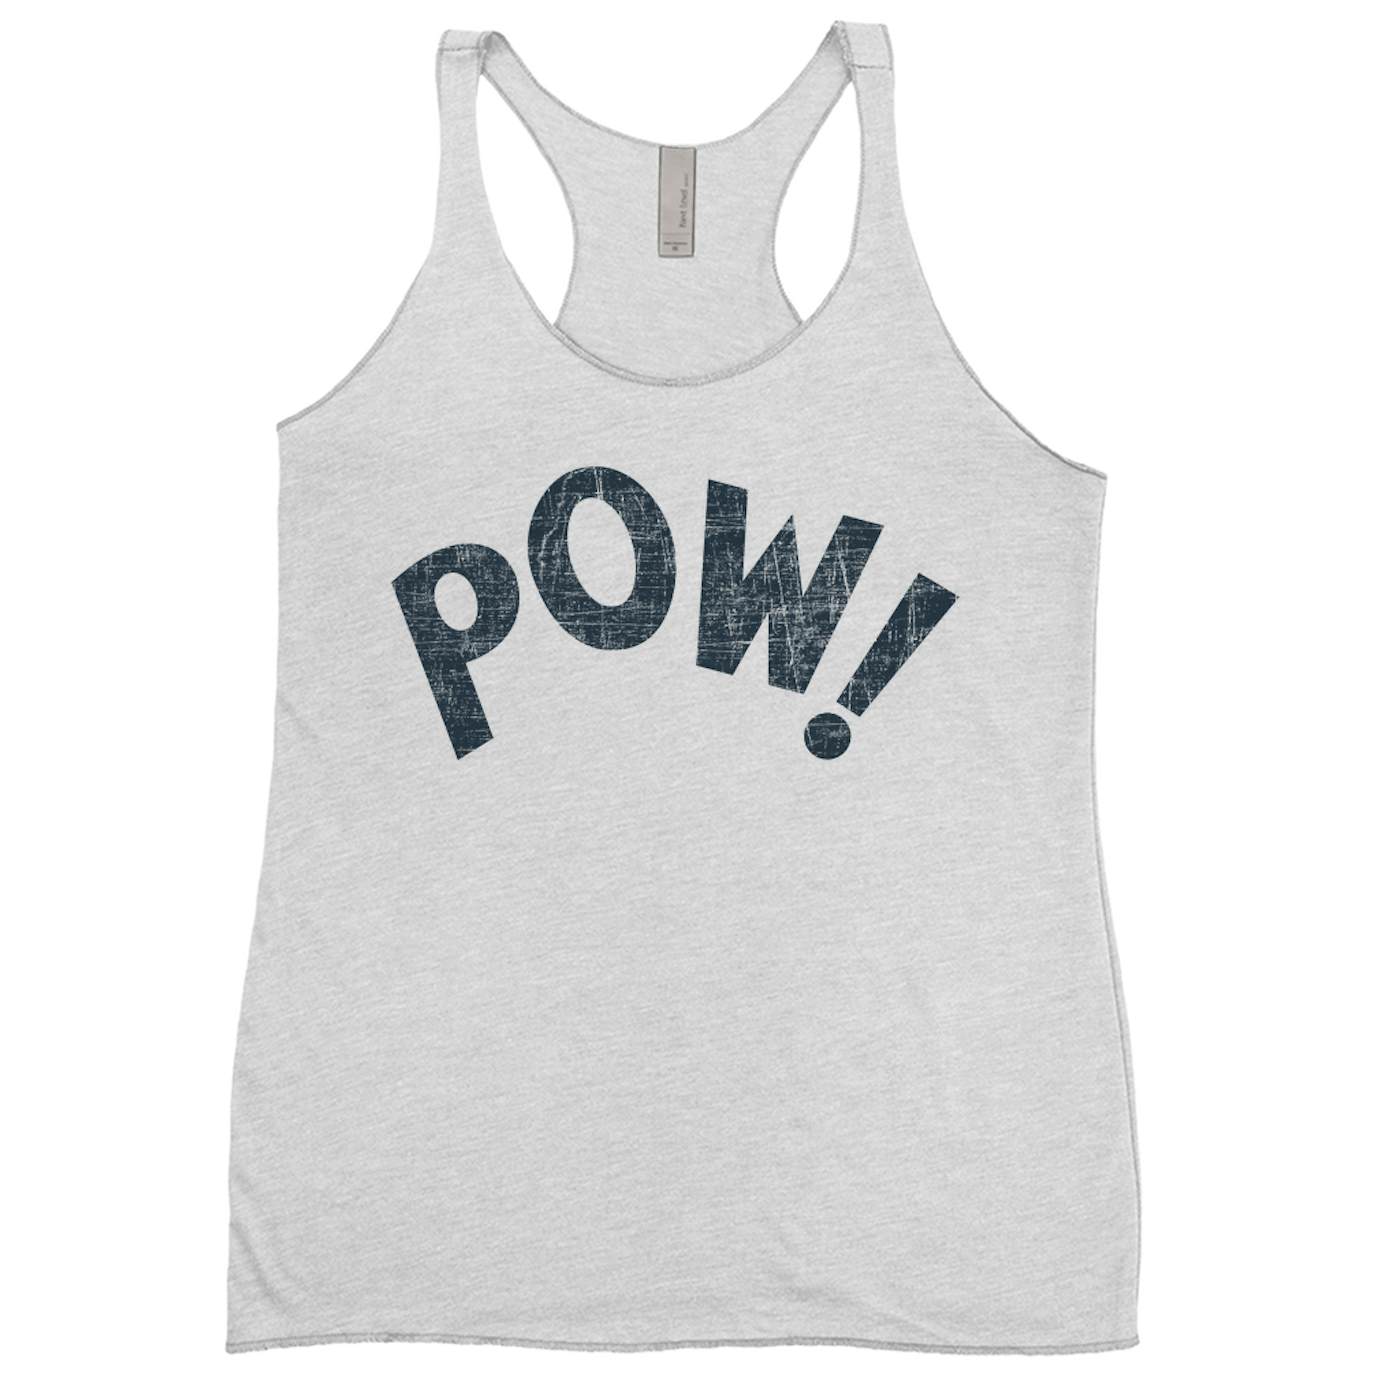 The Who Ladies' Tank Top | POW! Worn By Keith Moon The Who Shirt